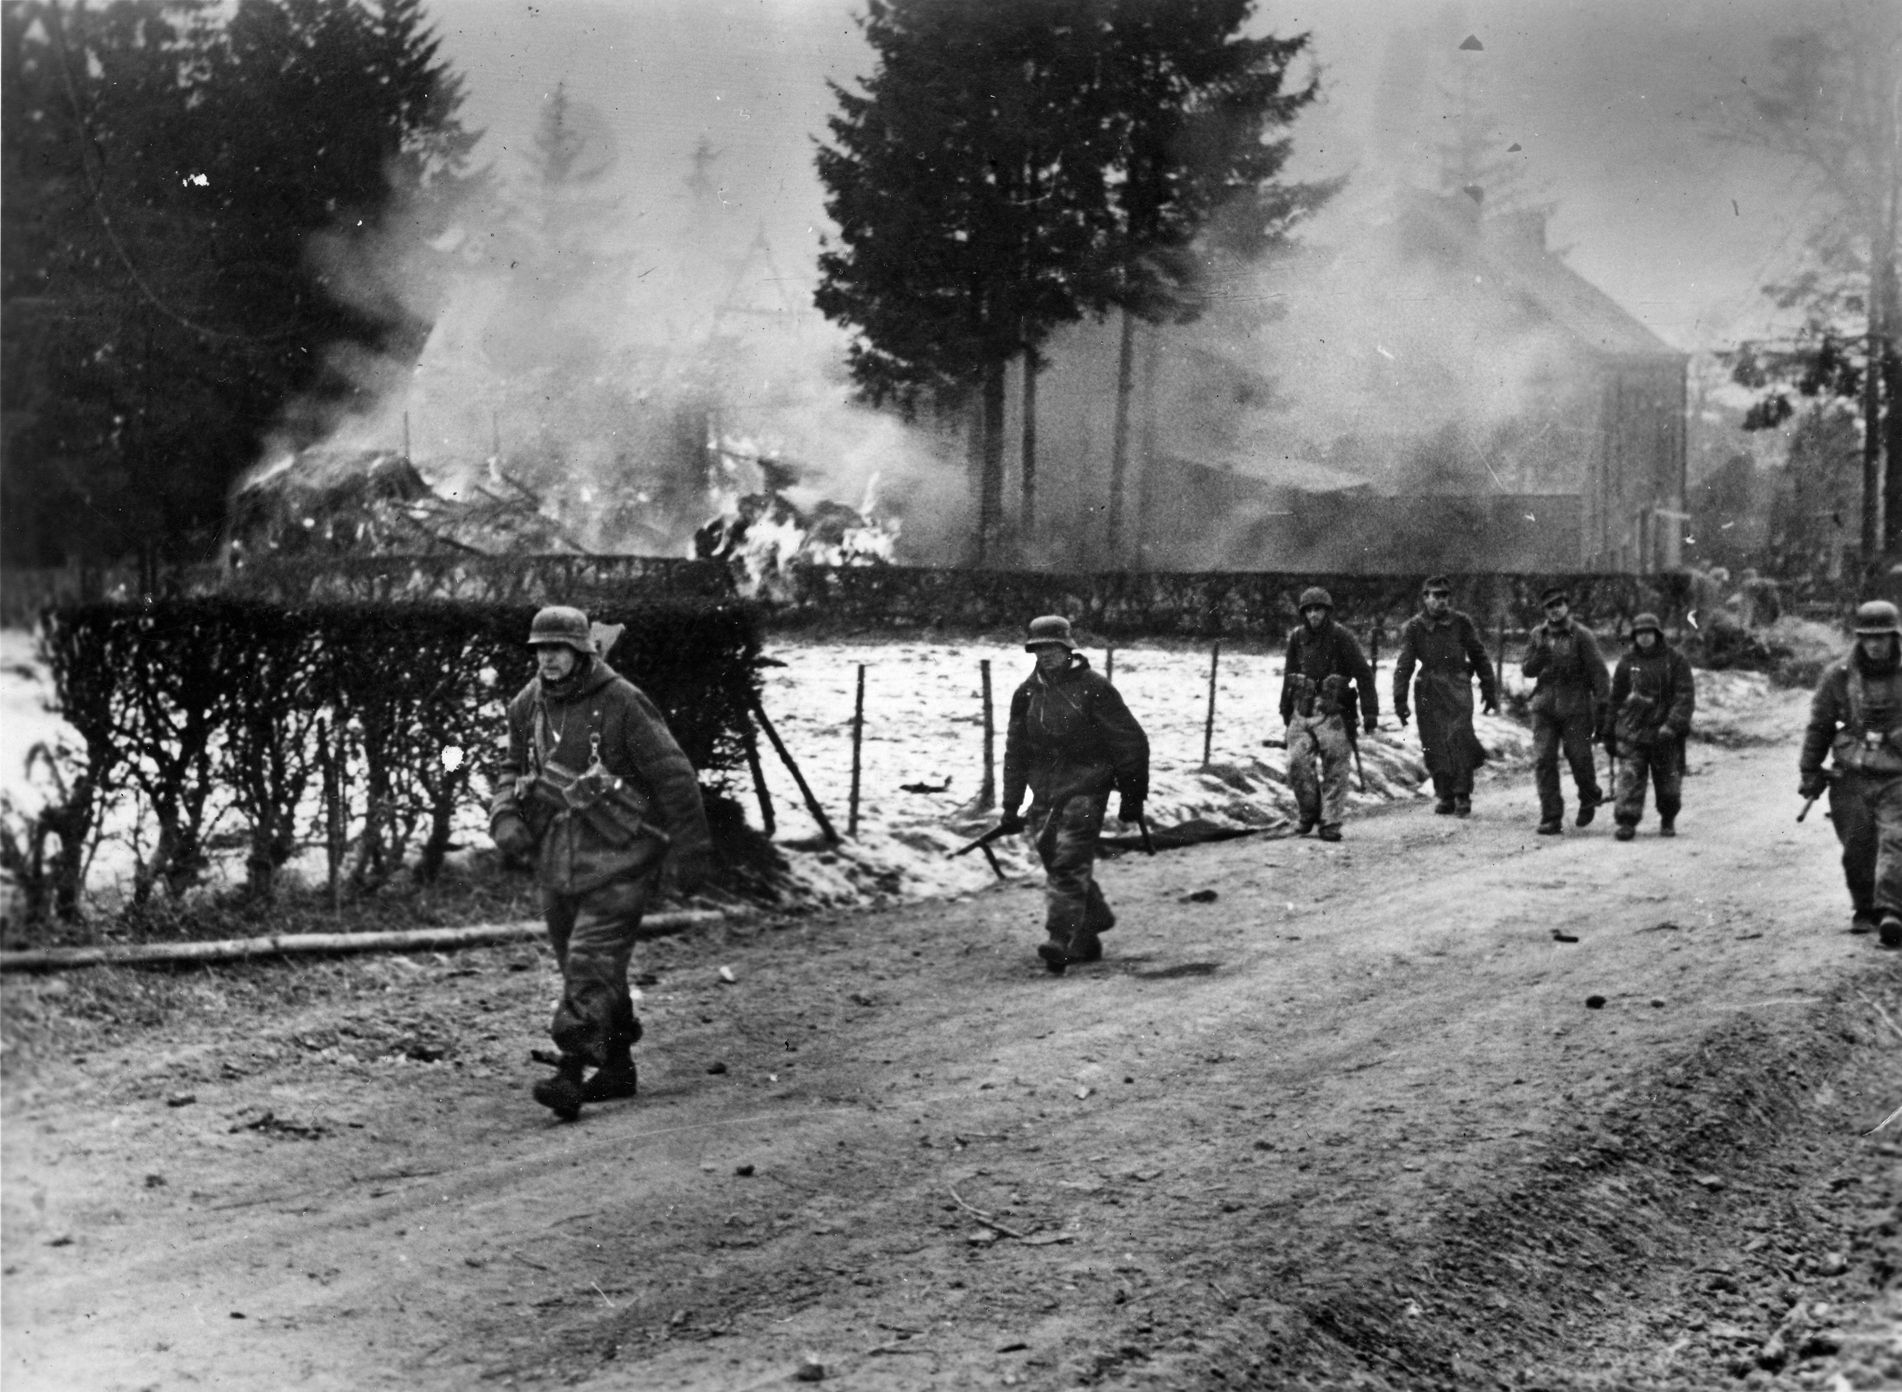 Photographed on the move prior to Operation Veritable, German panzergrenadiers move through a village as several buildings are consumed by flames. Battle-hardened German soldiers mounted effective defensive efforts in the Reichswald, delaying the movement of British forces deeper into the industrialized Ruhr.